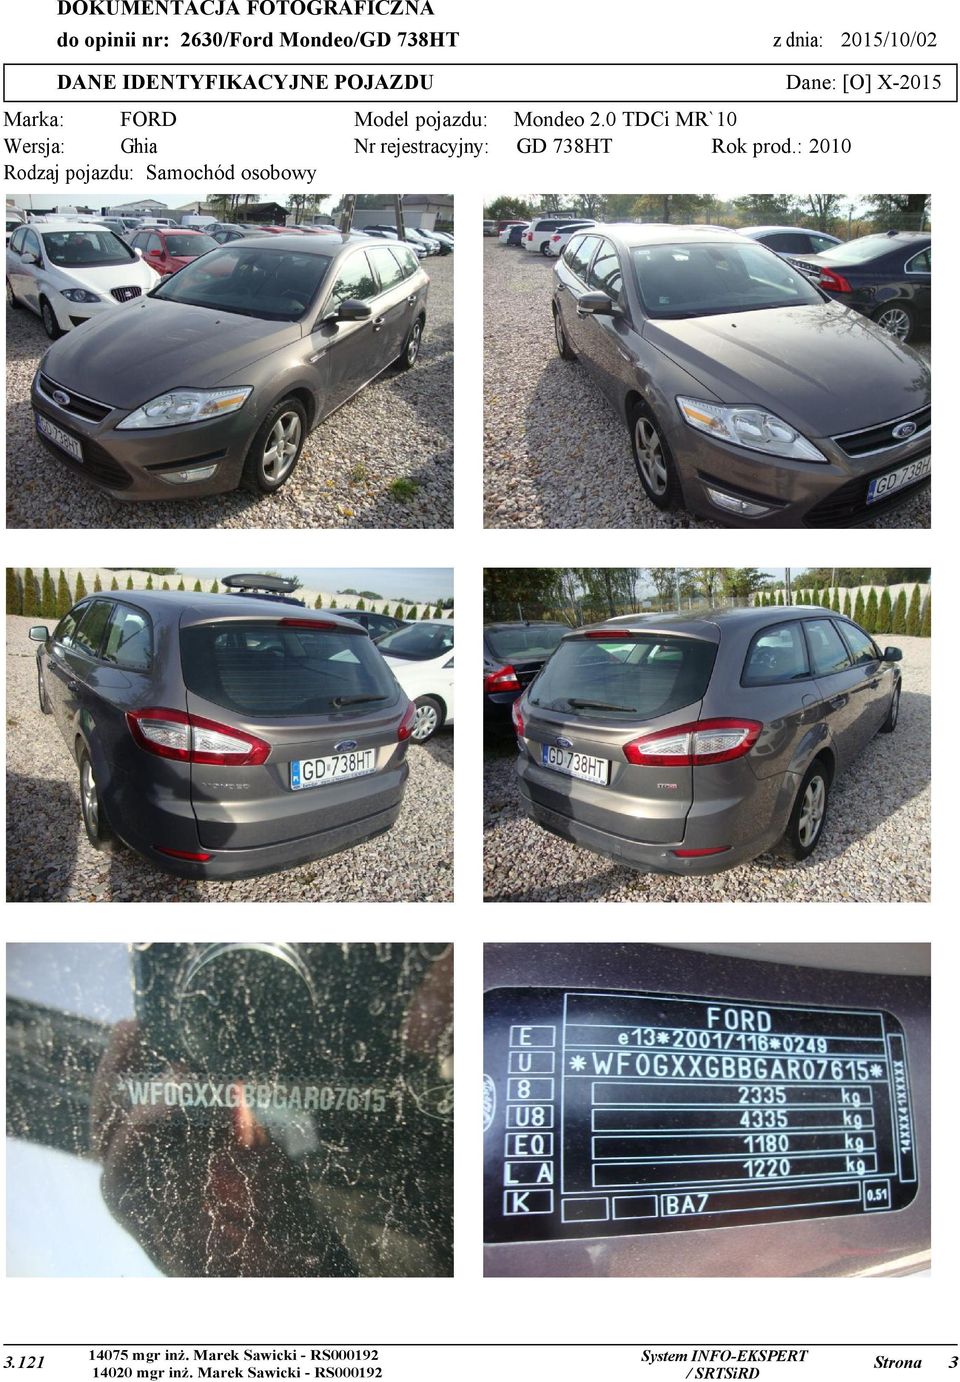 nr: 2630/Ford Mondeo/GD